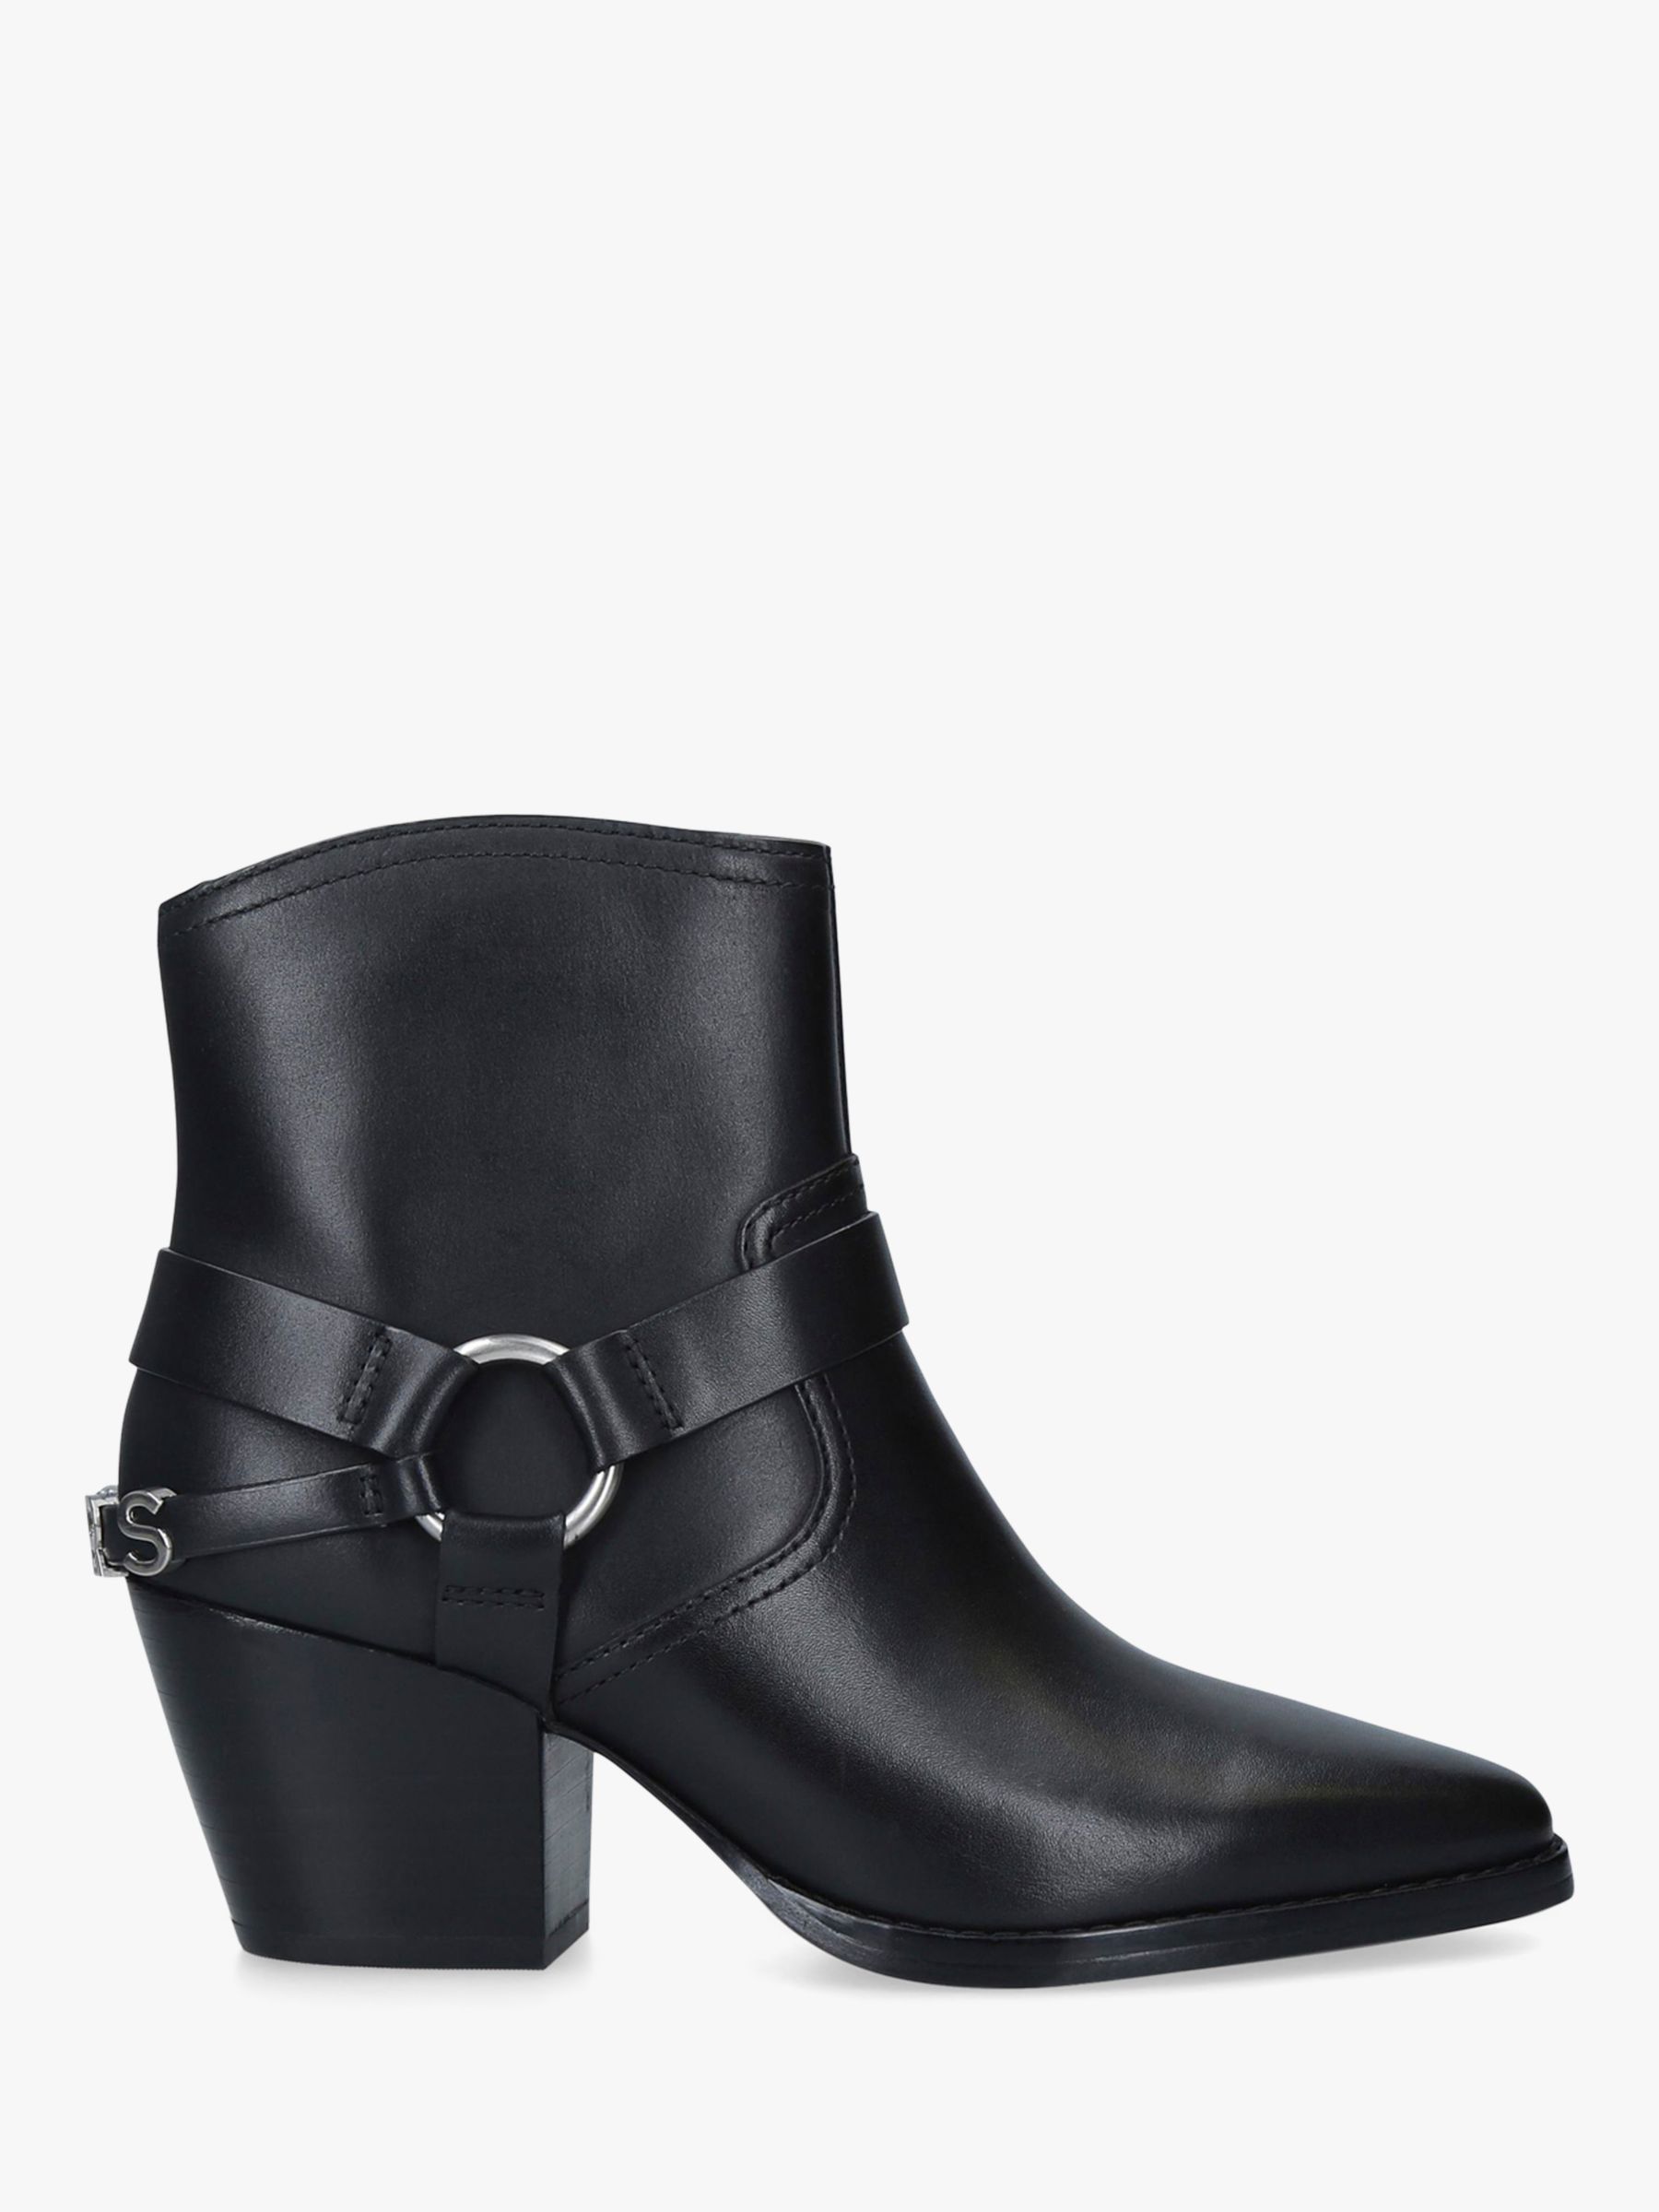 MICHAEL Michael Kors Goldie Leather Moto Ankle Boots, Black